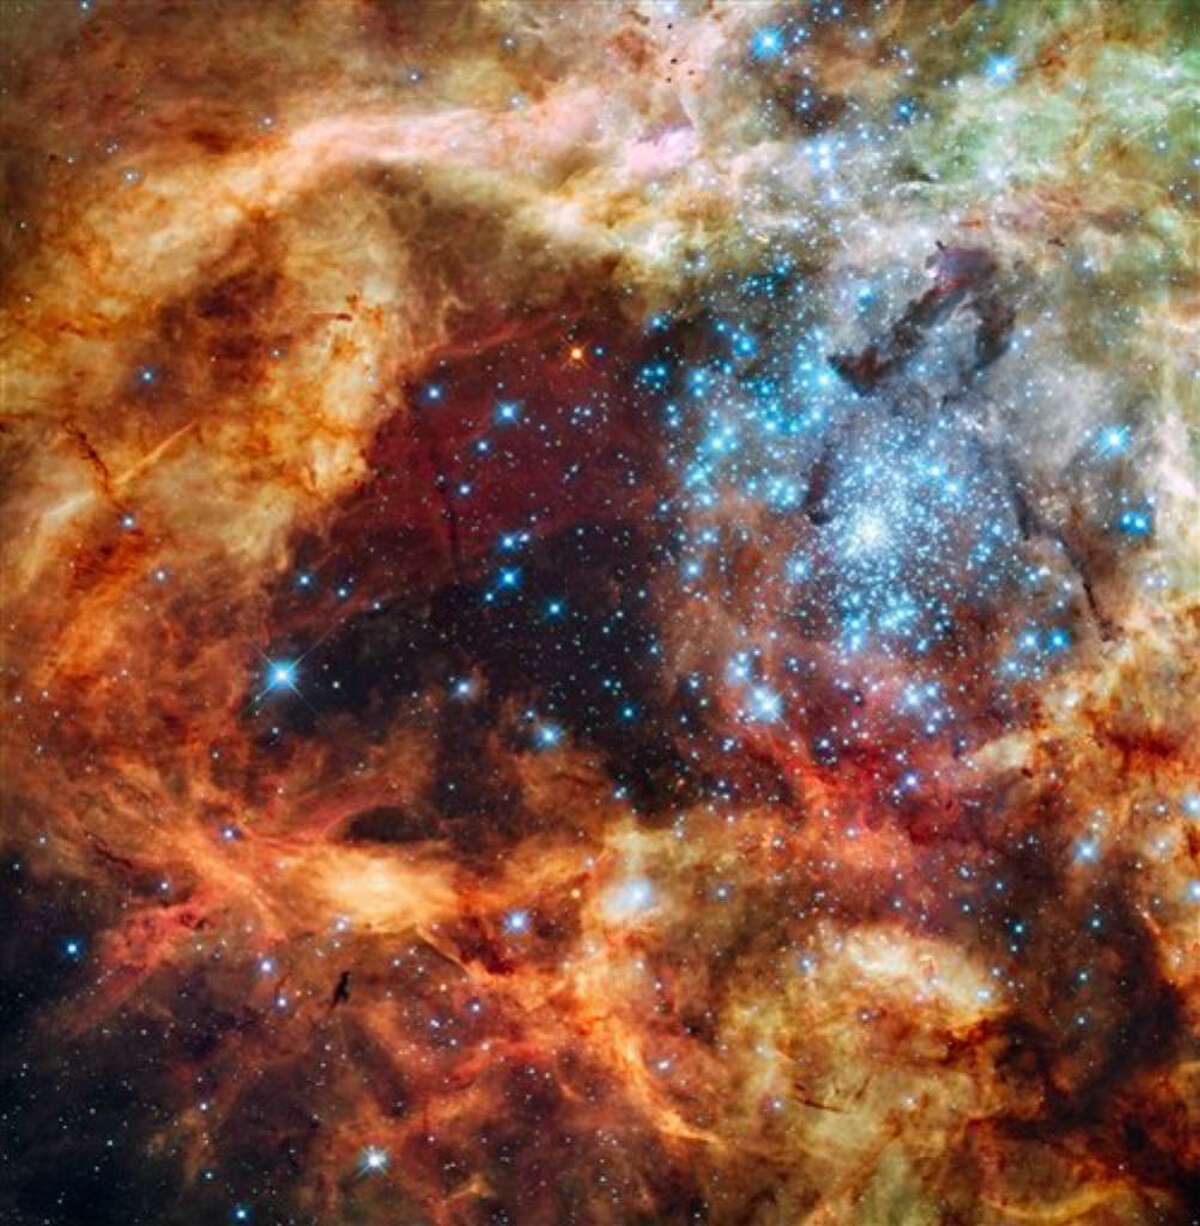 This image provided by NASA's Hubble Space Telescope Tuesday Dec. 15, 2009 shows hundreds of brilliant blue stars wreathed by warm, glowing clouds. The festive portrait is the most detailed view of the largest stellar nursery in our local galactic neighborhood. The massive, young stellar grouping, called R136, is only a few million years old and resides in the 30 Doradus Nebula, a turbulent star-birth region in the Large Magellanic Cloud (LMC), a satellite galaxy of our Milky Way. There is no known star-forming region in our galaxy as large or as prolific as 30 Doradus. (AP Photo/NASA)